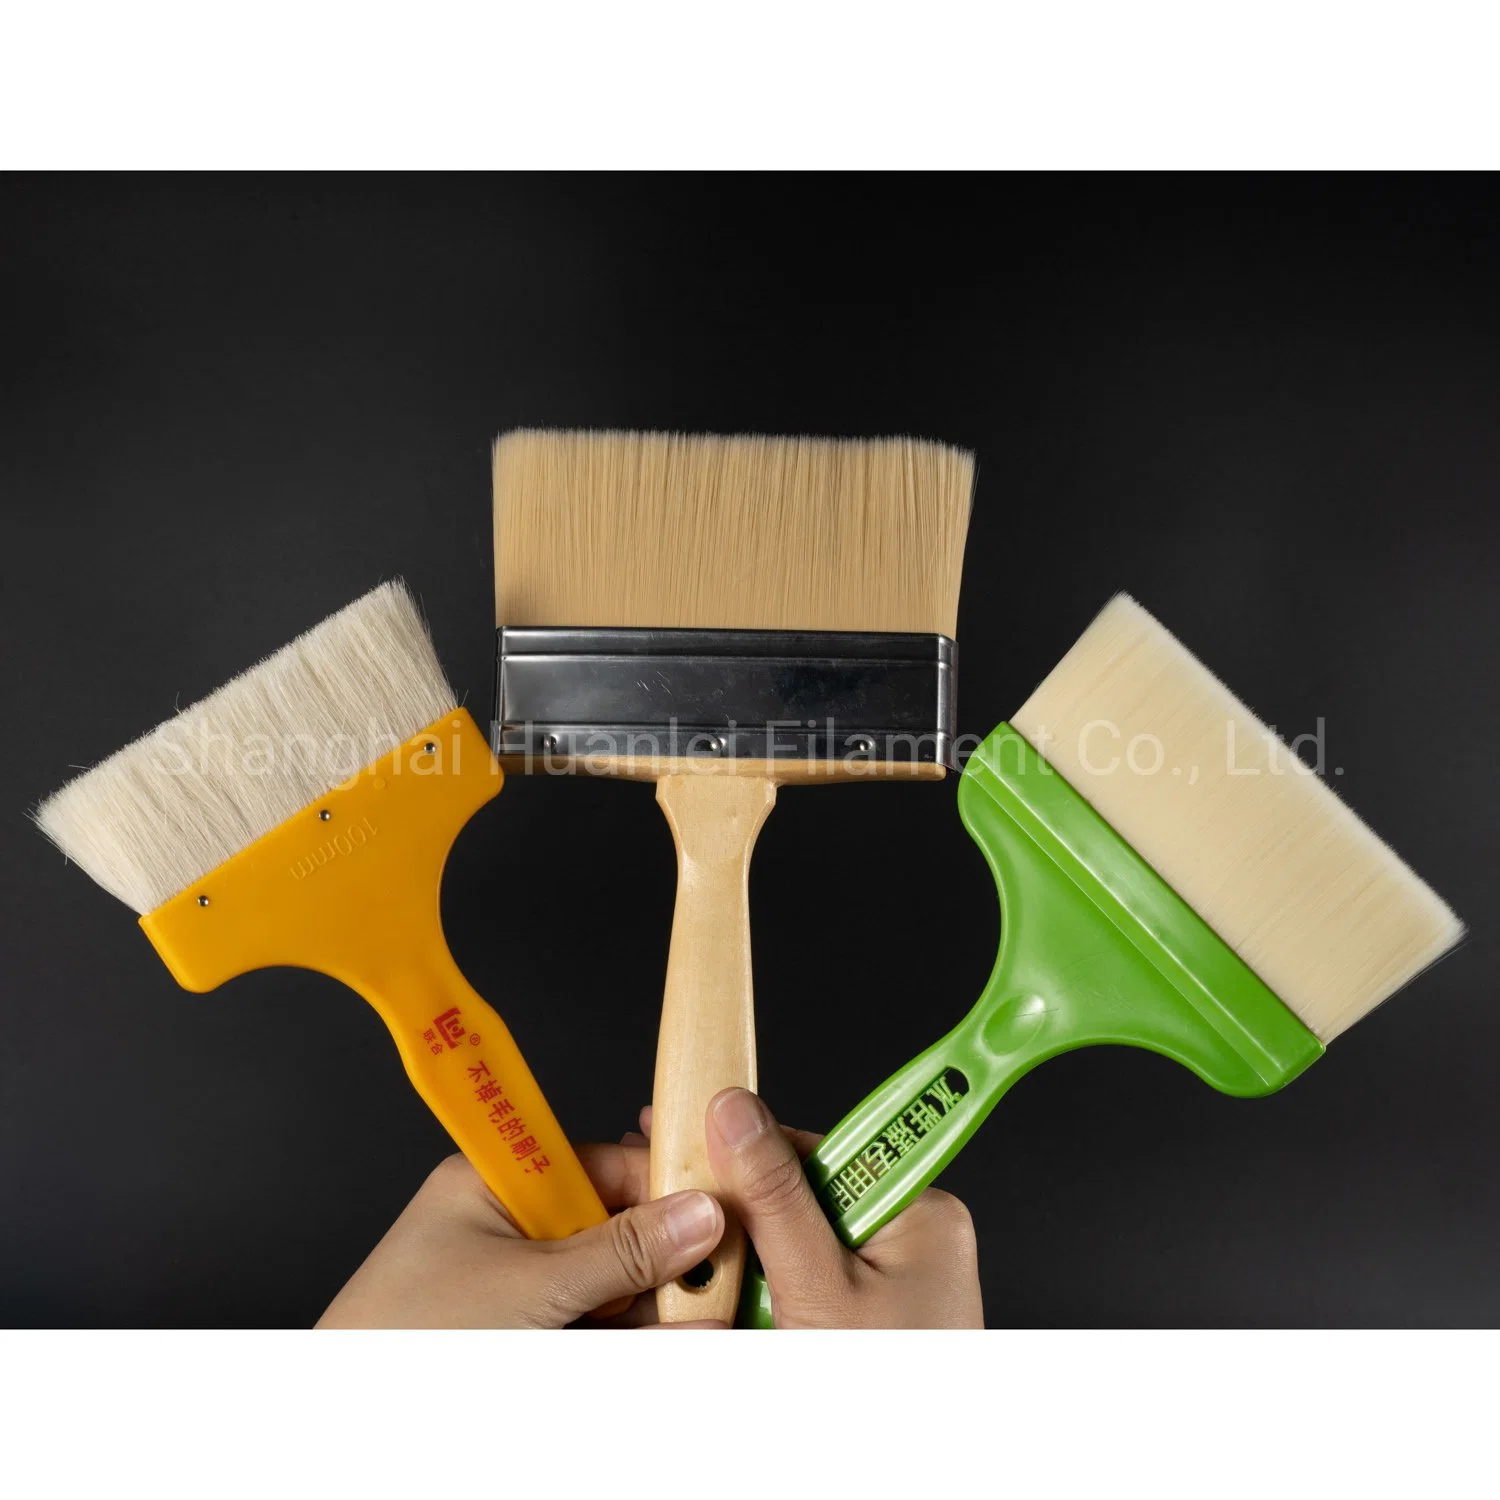 White Nature Twice Boiled Bristle Imitiation Animal Hair for Paint Brush Rawmaterial